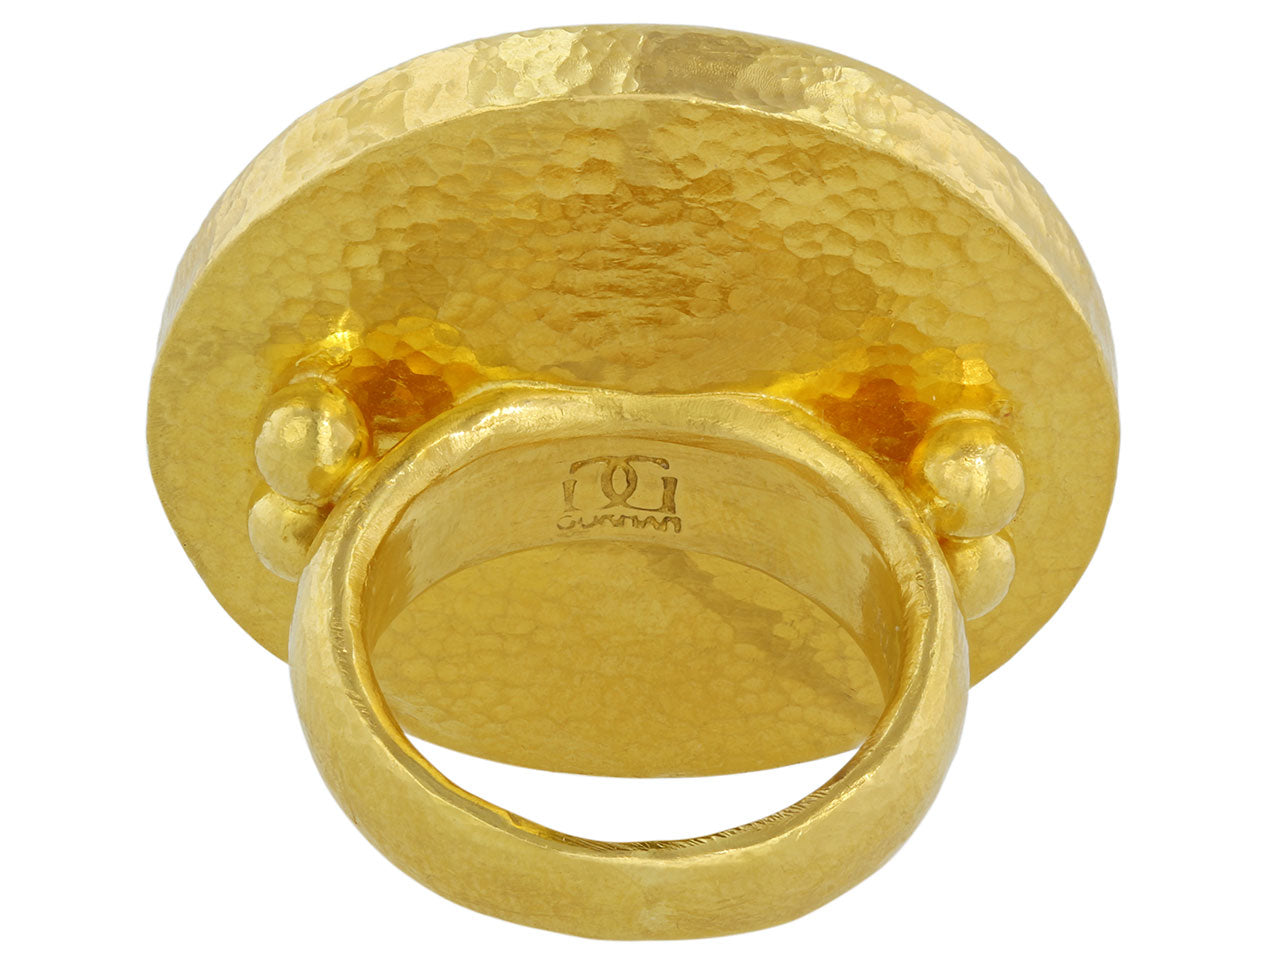 Gurhan Diamond Ring in 24K Gold and Blackened Silver